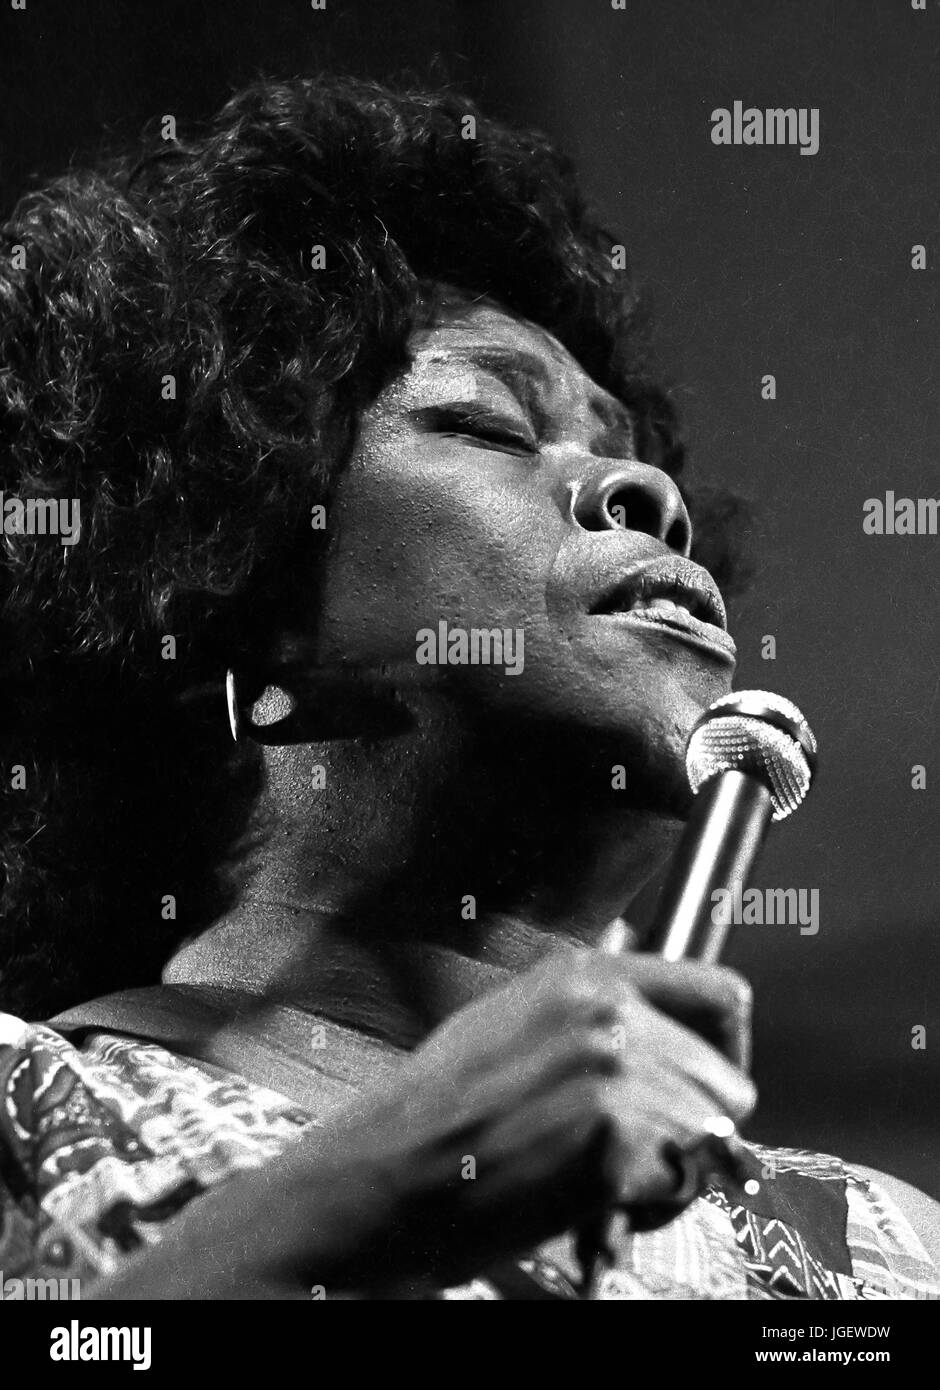 Jazz legend Sarah Vaughan performs at the Newport Jazz Festival at Fort Adams State Park in Newport, Rhode Island, 08/22/1982. Stock Photo